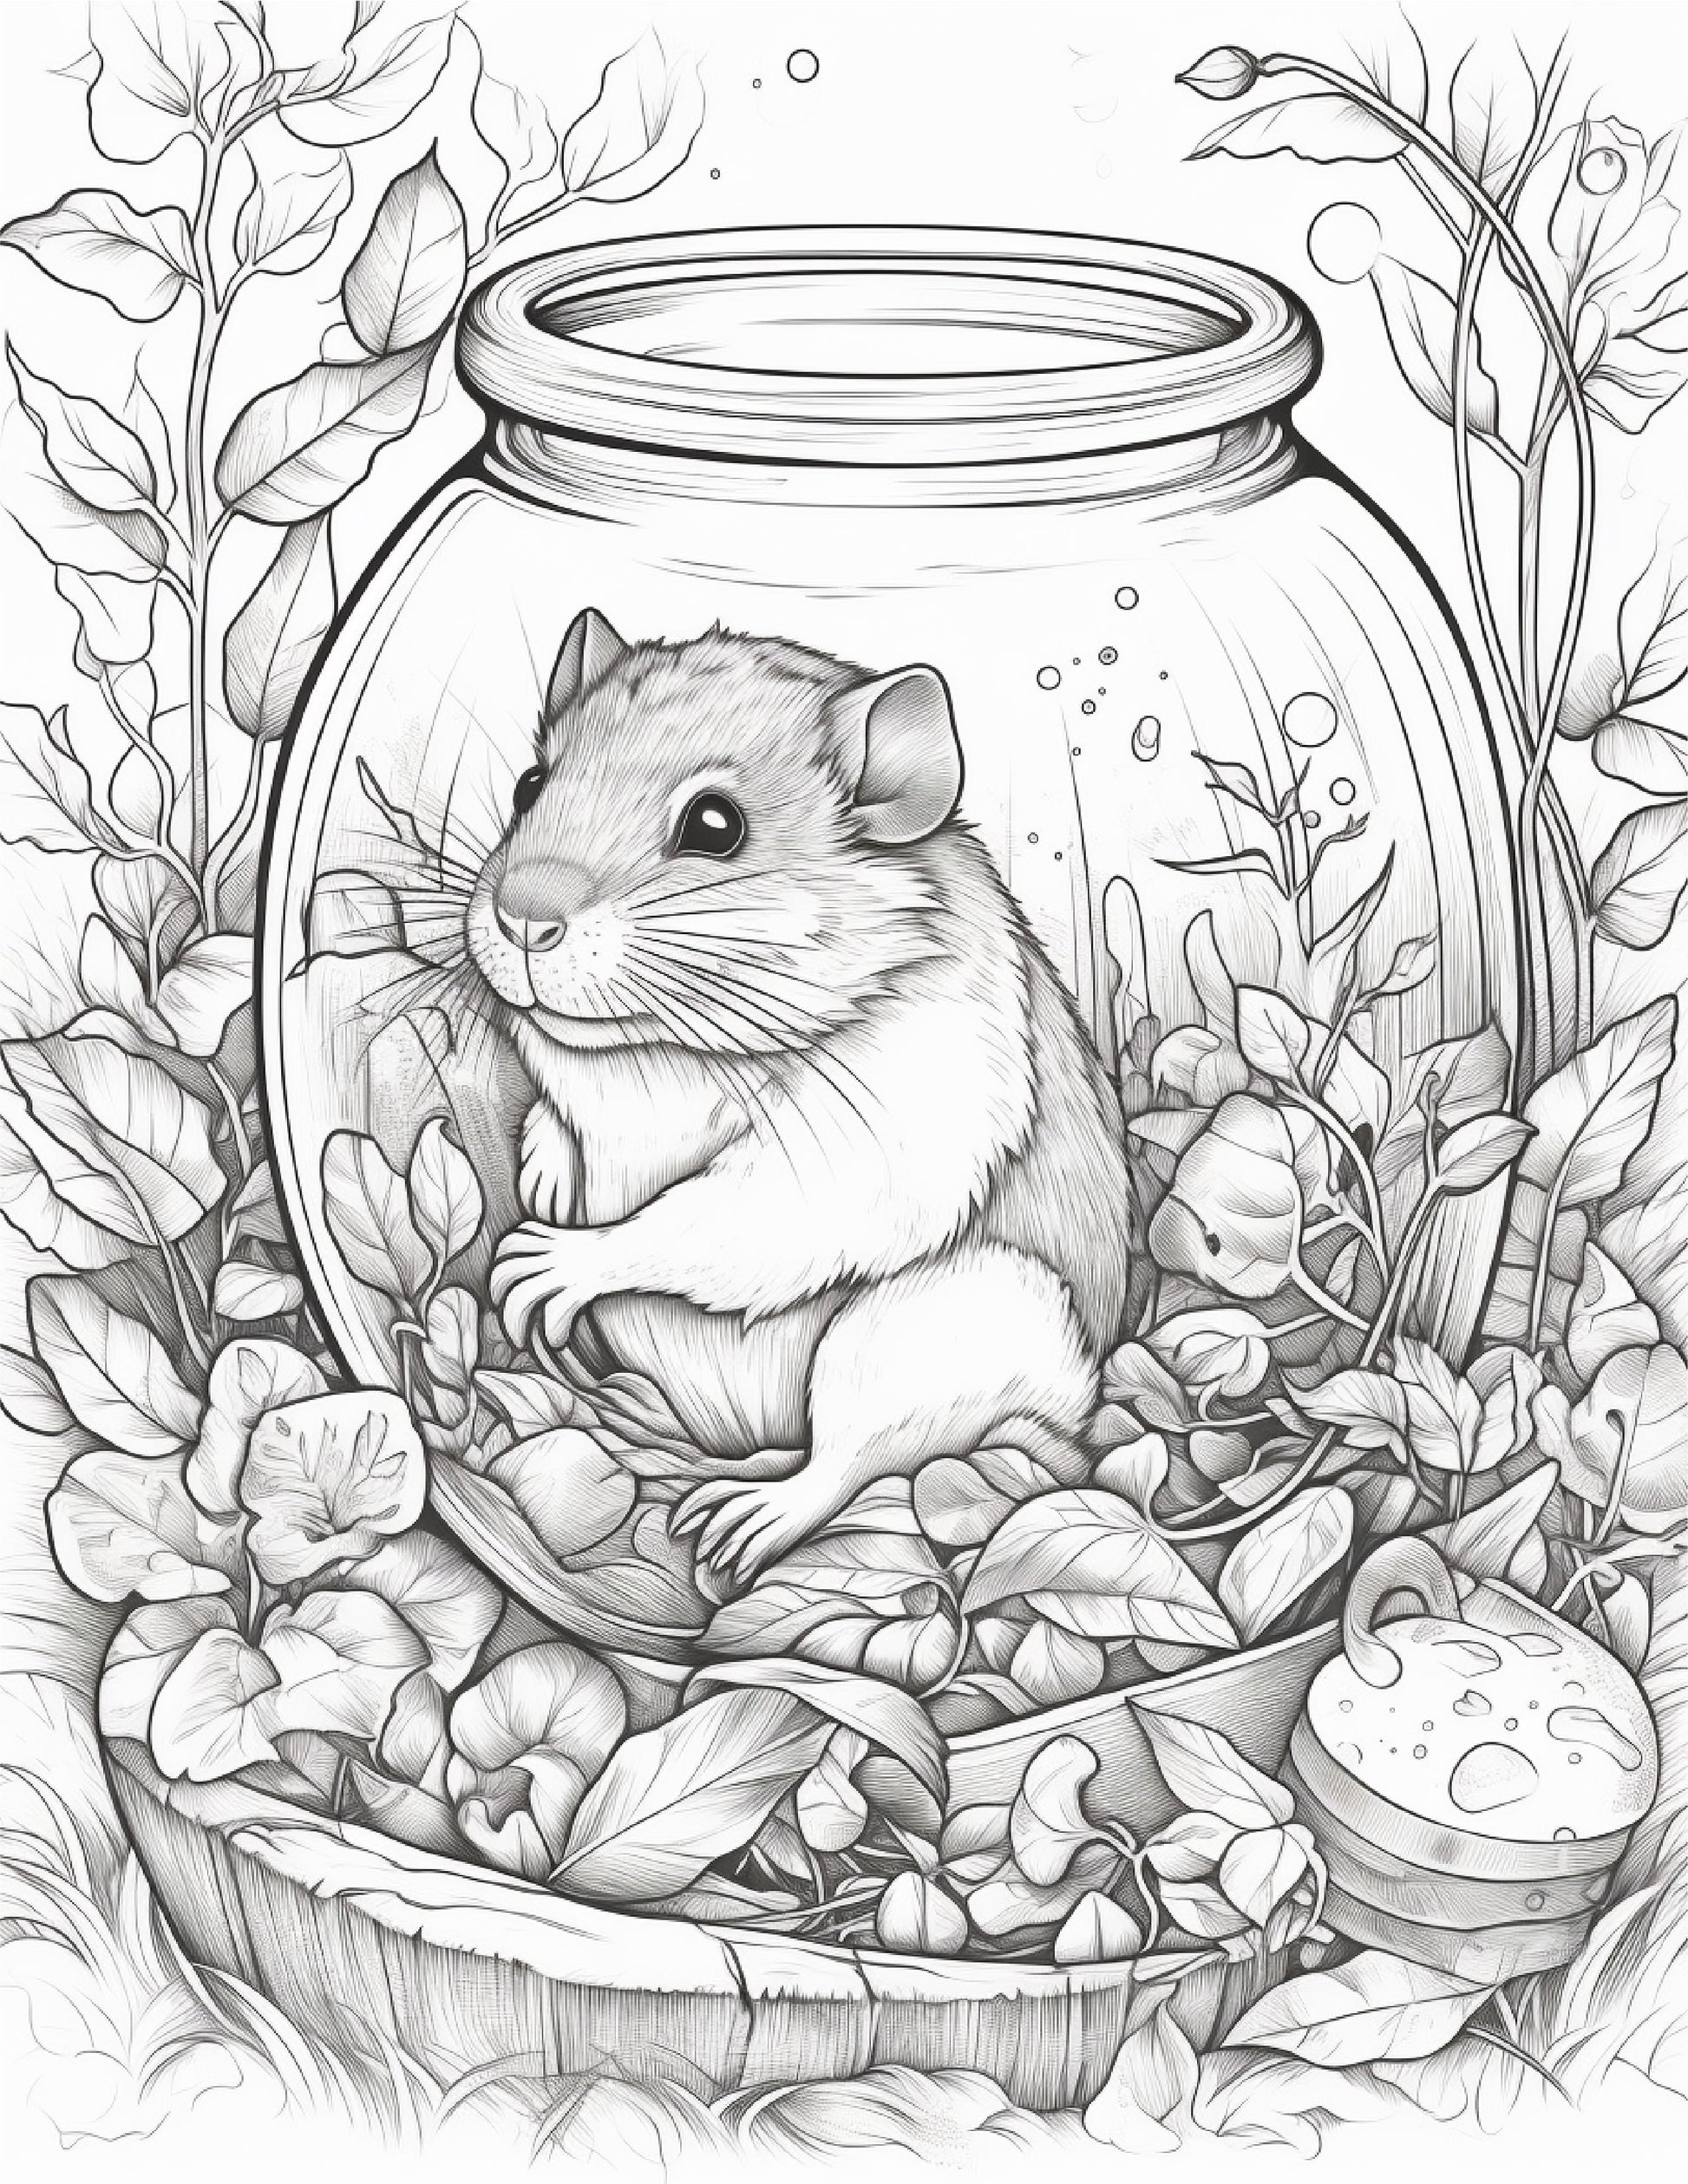 Life inside jar printable coloring pages for adults grayscale colo â coloring